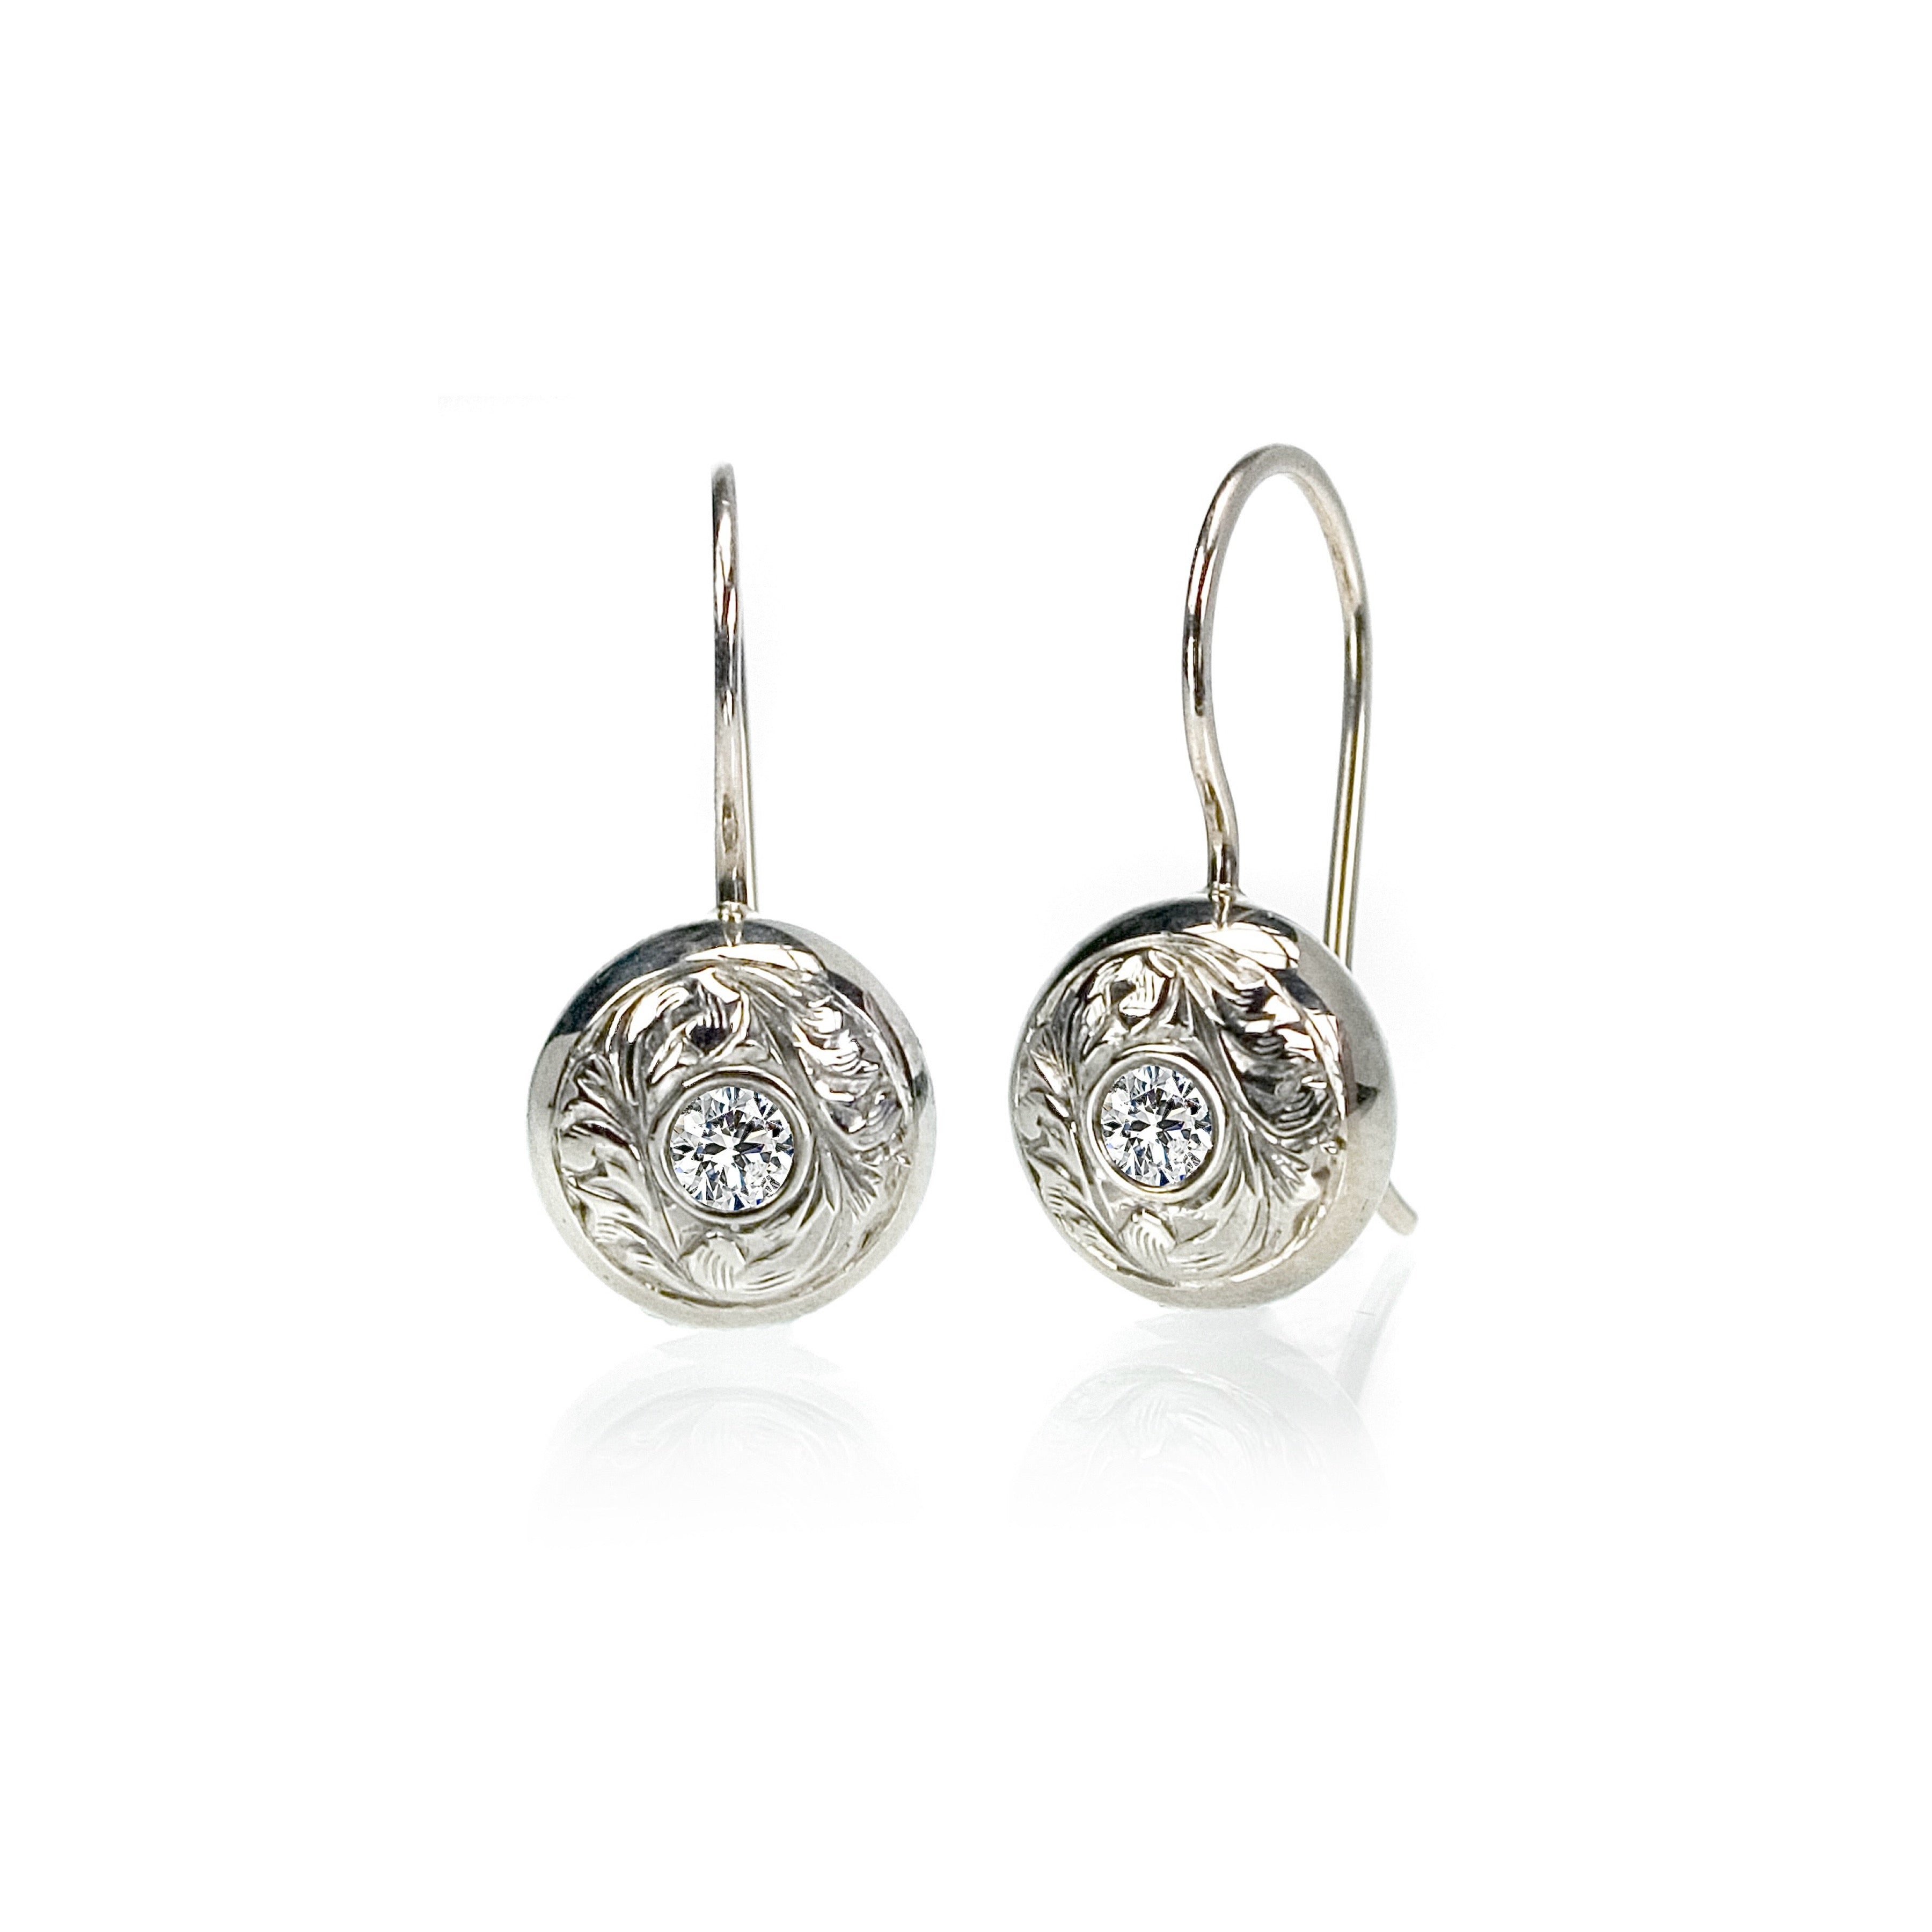 Crafted in 14KT white gold, these drop earrings feature round brilliant-cut diamonds with paisley hand-engraved halos. 